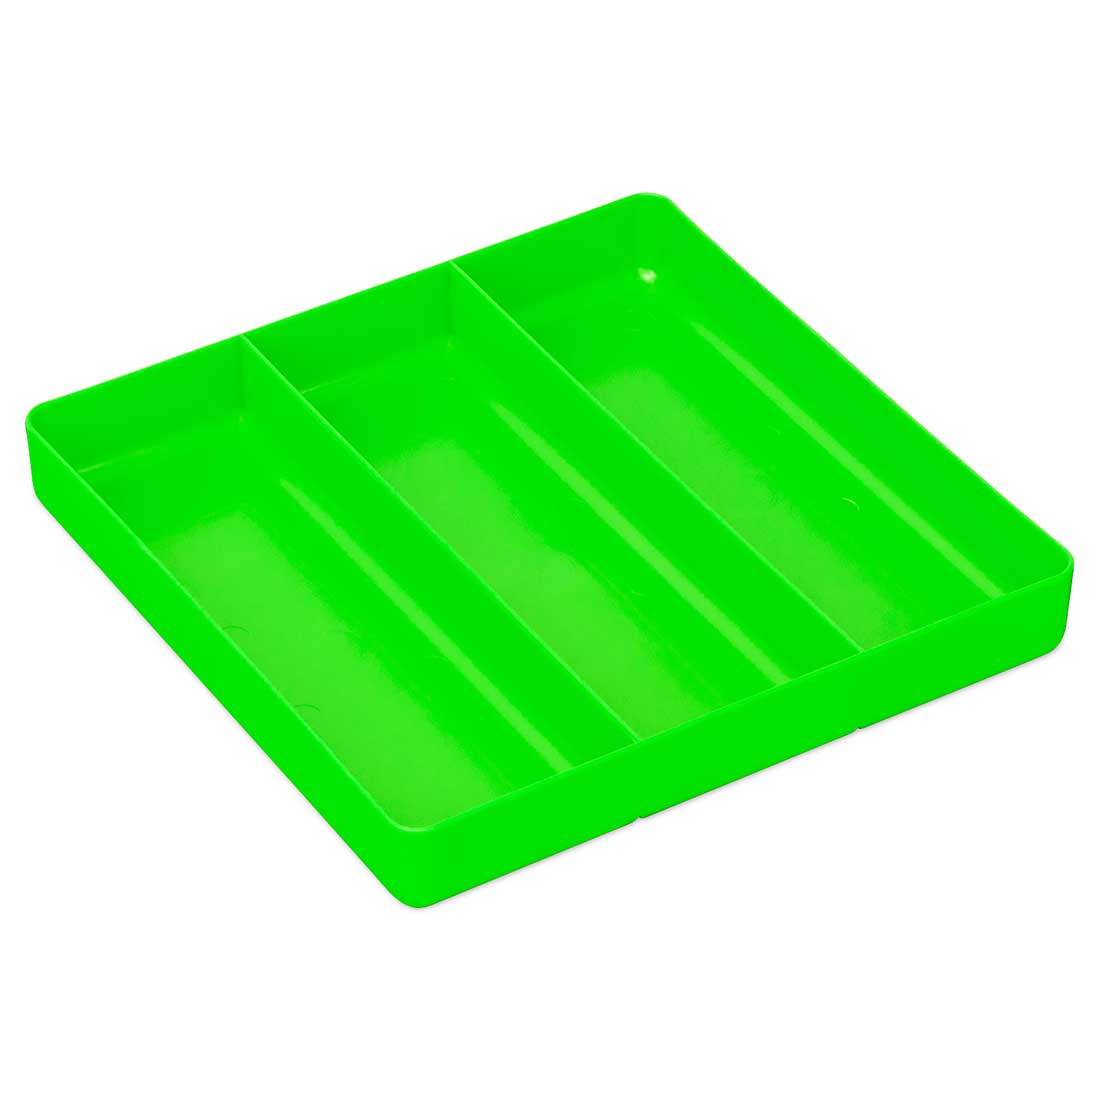 Ernst 5024 3 Compartment Toolbox Tray Organizer - Green